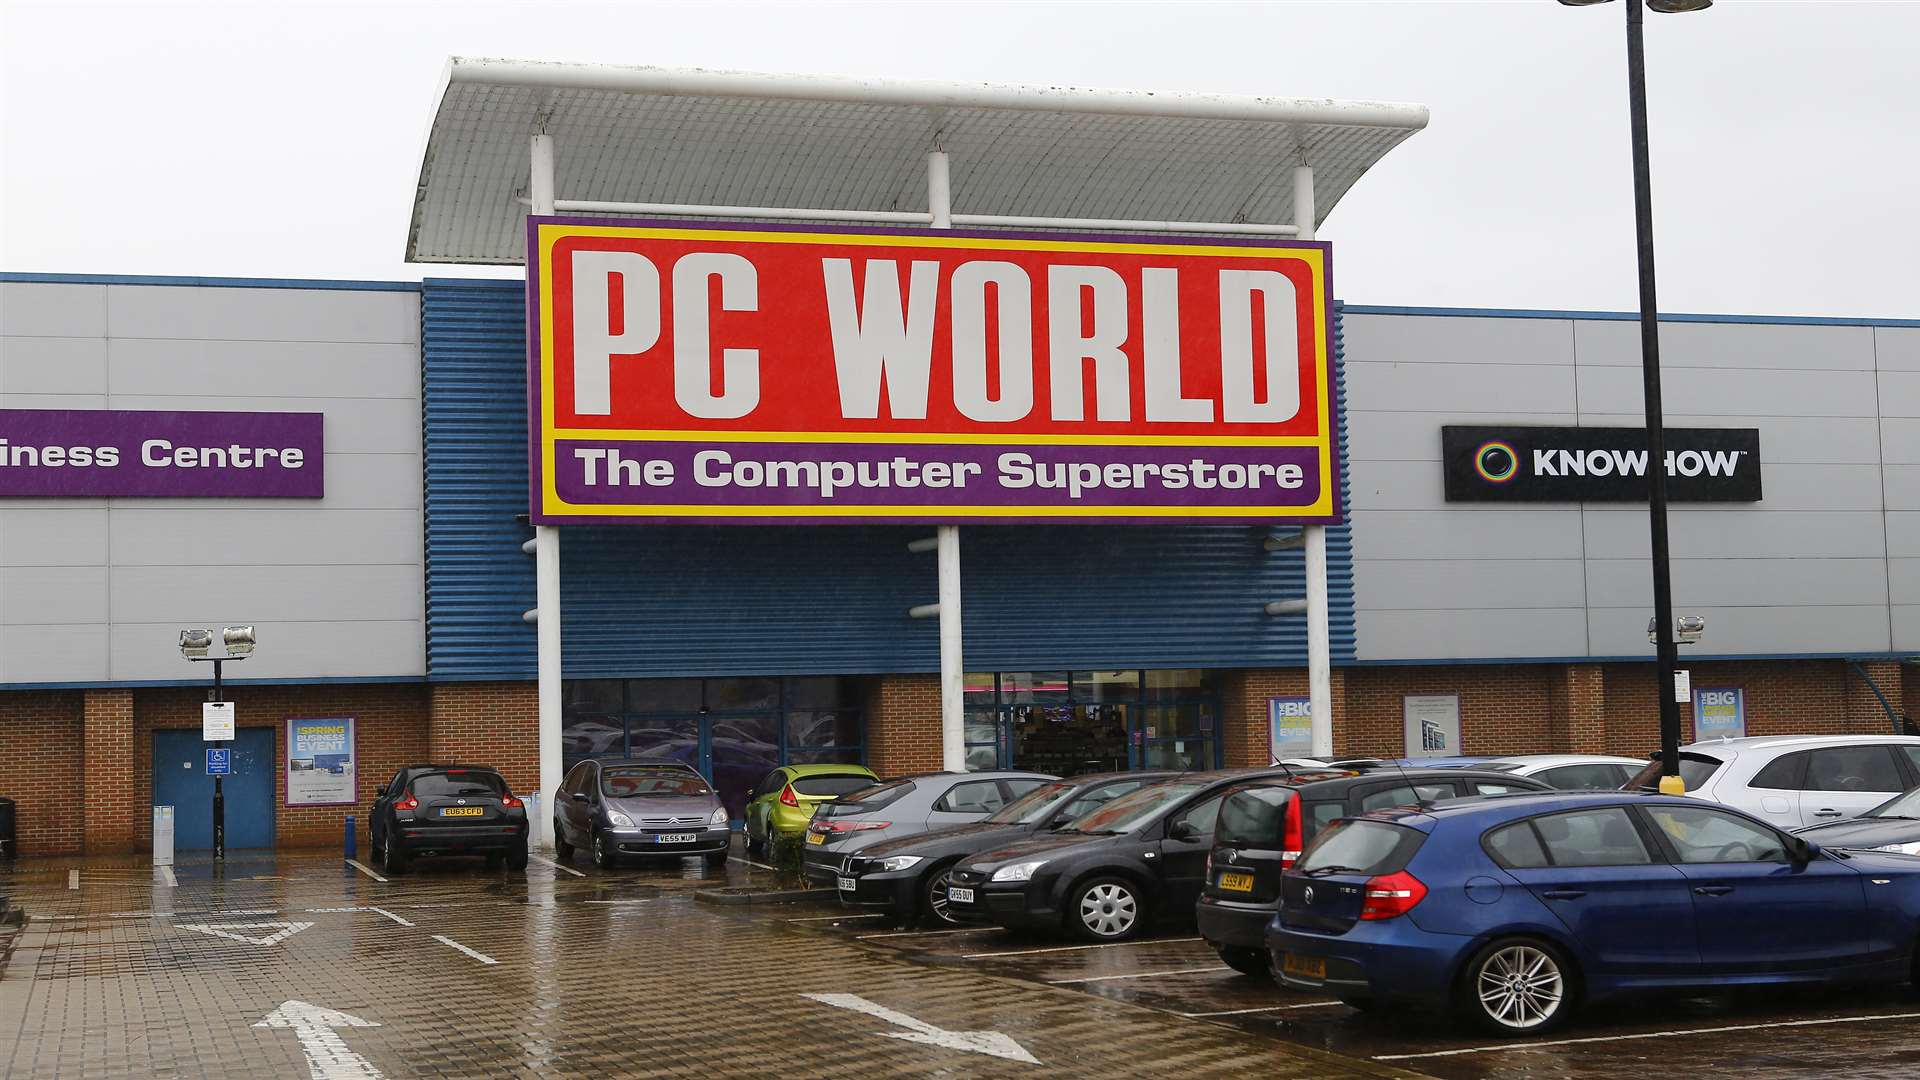 Ashford Pc World Store In Barrey Road To Close In Nationwide Shakeup By Parent Company Dixons Carphone